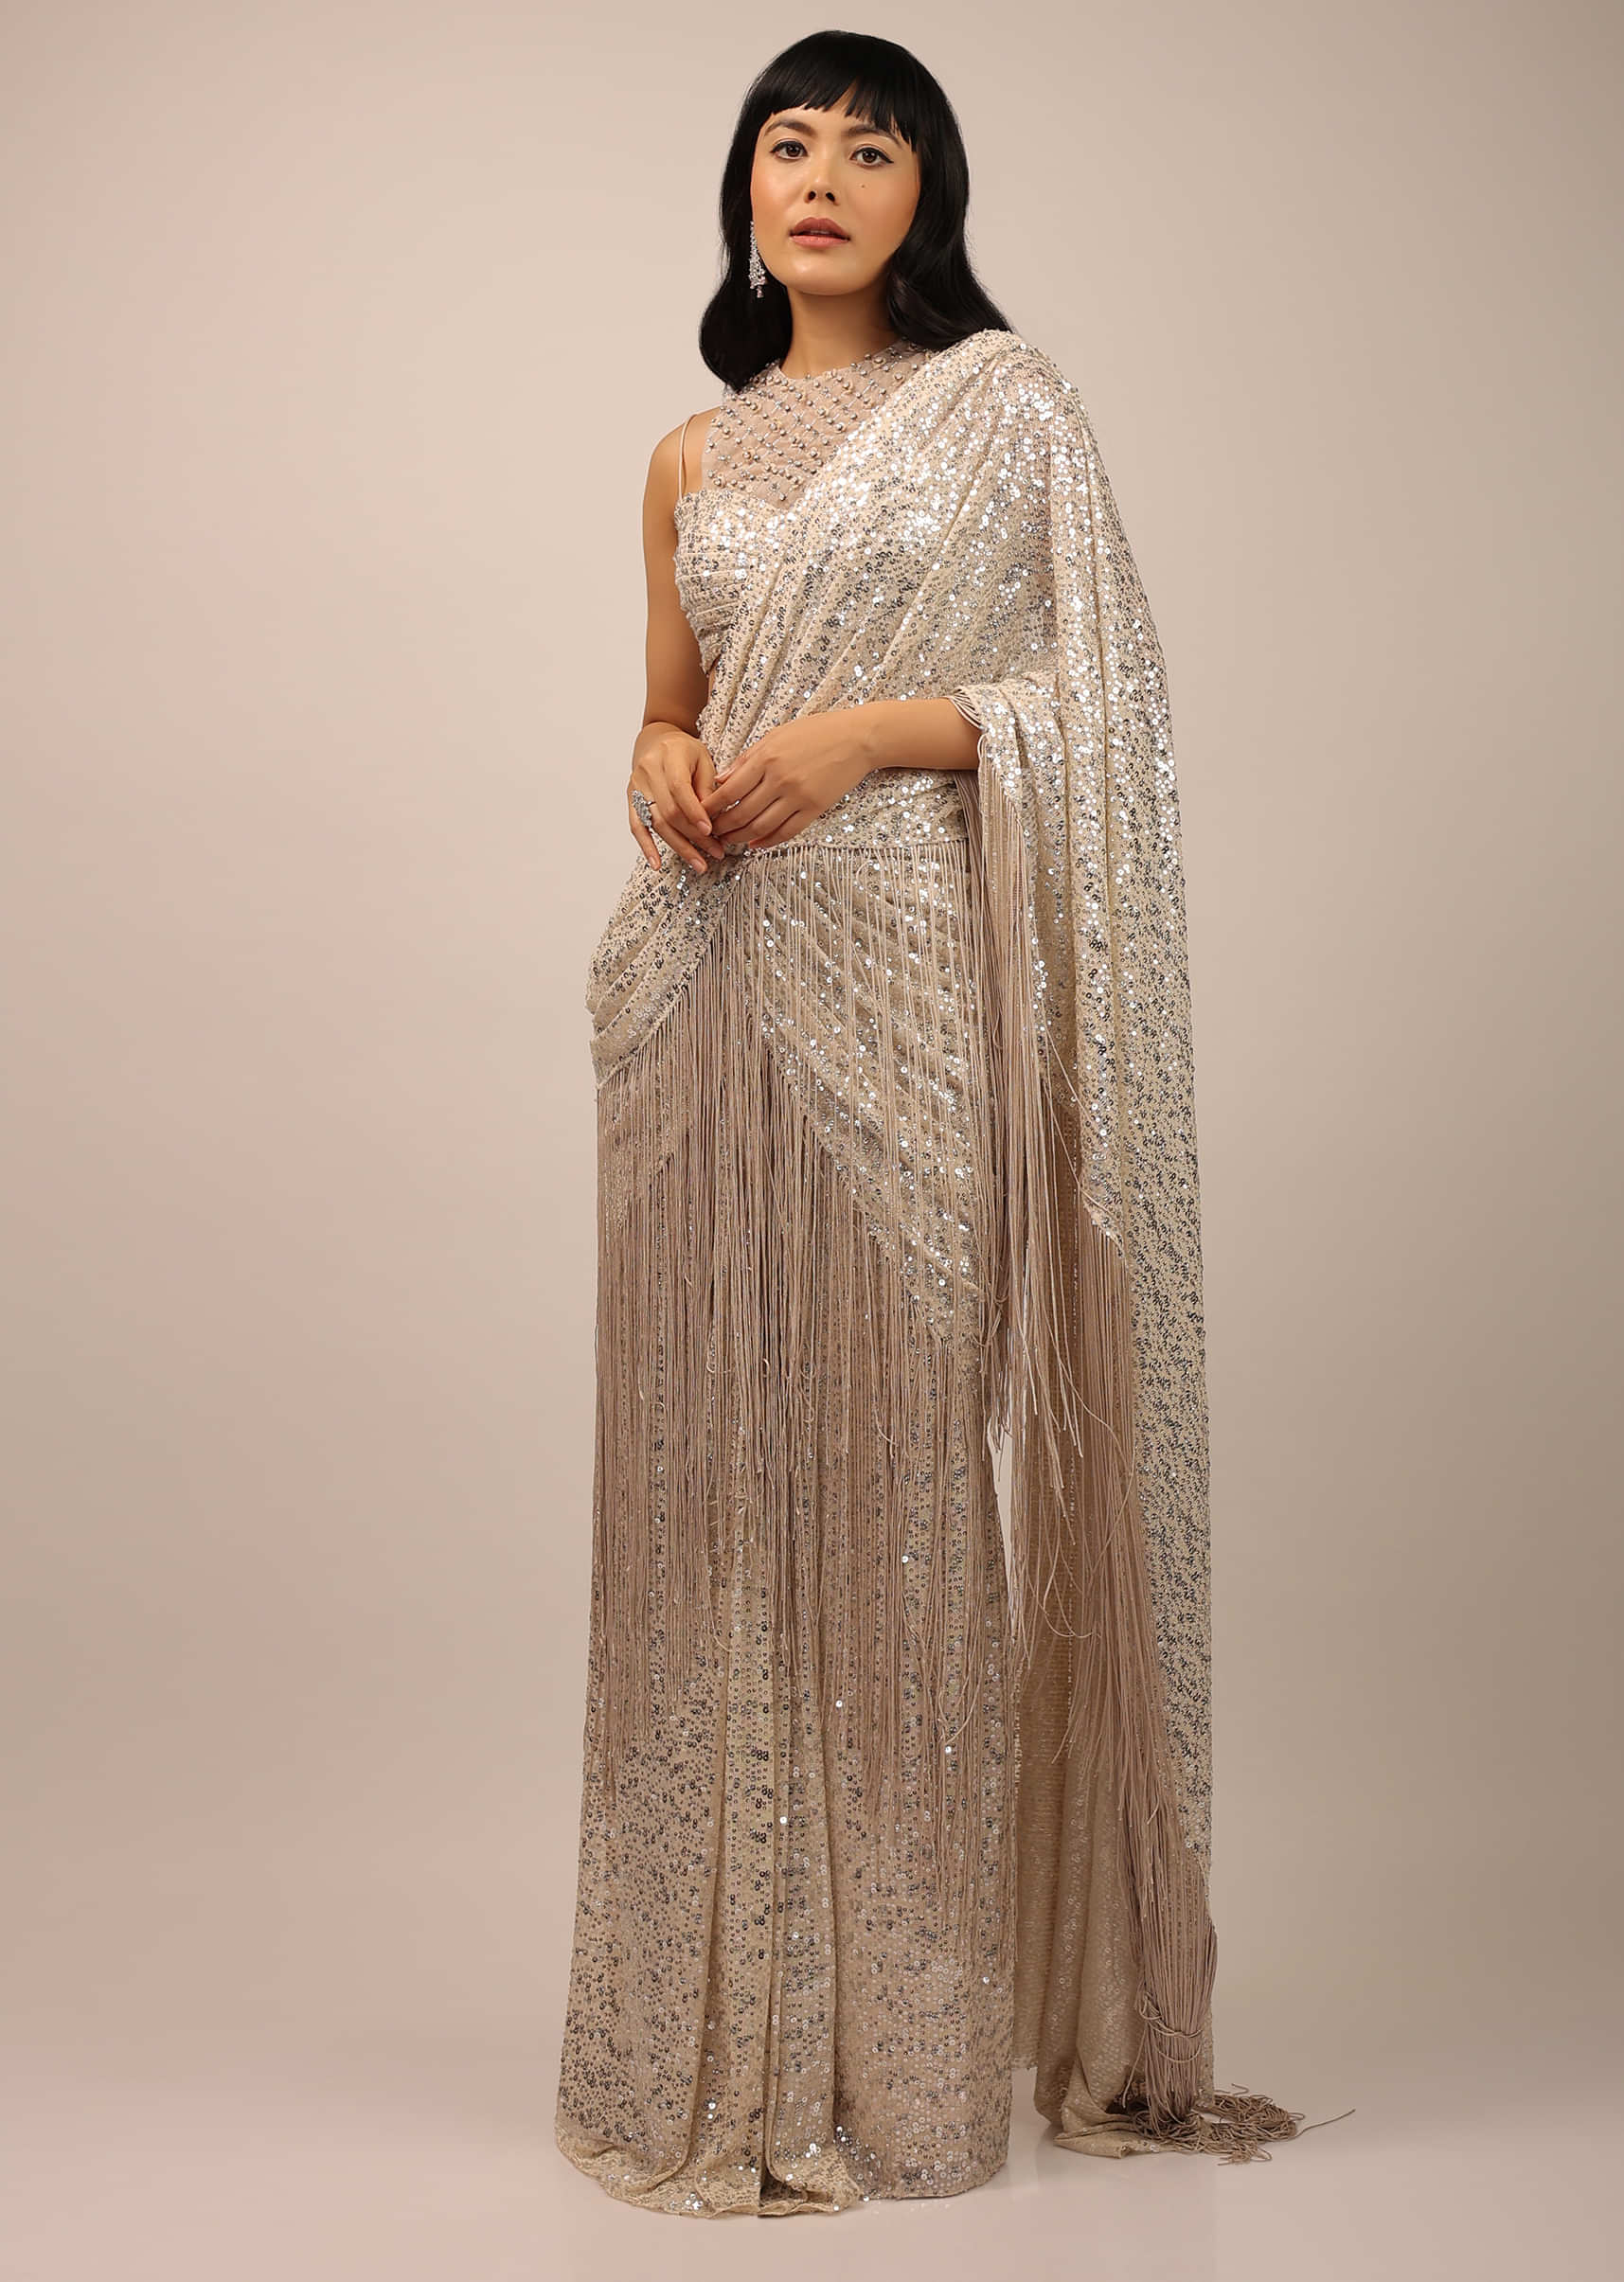 White Sequins Saree With A Fringe Border And Blouse With A Fancy Neckline